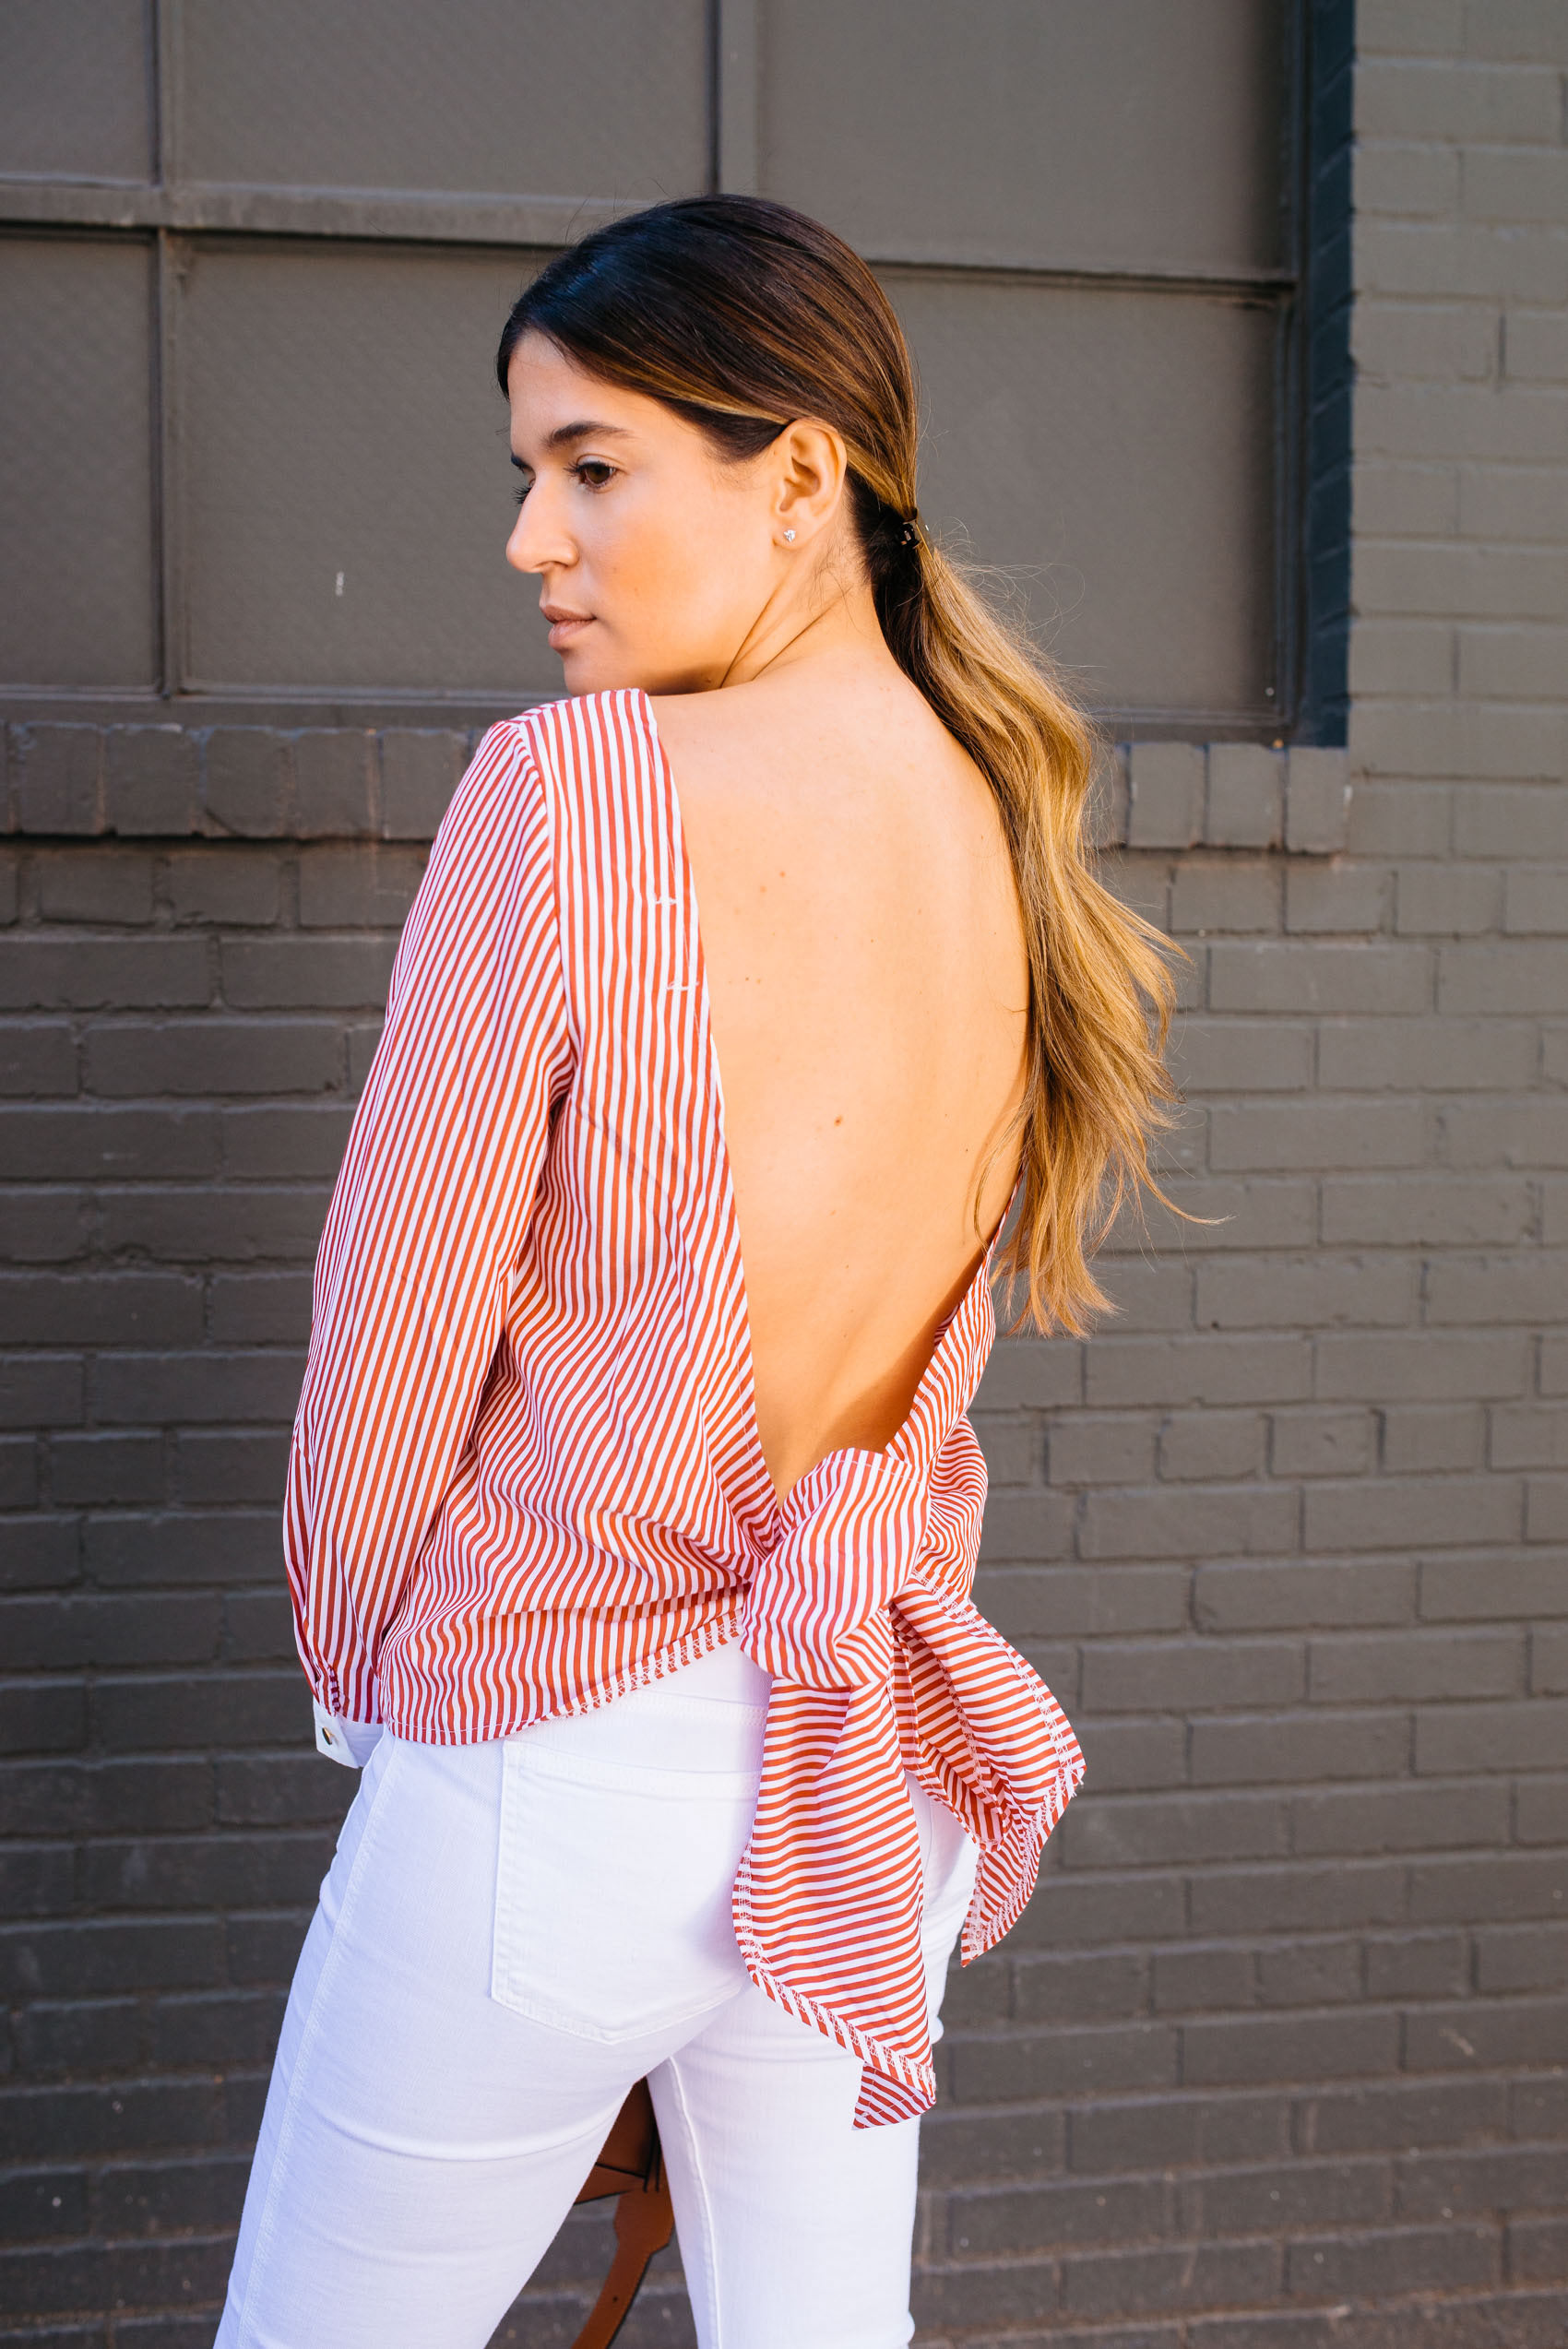 Maristella in an elegant and sexy open back blouse with white denim